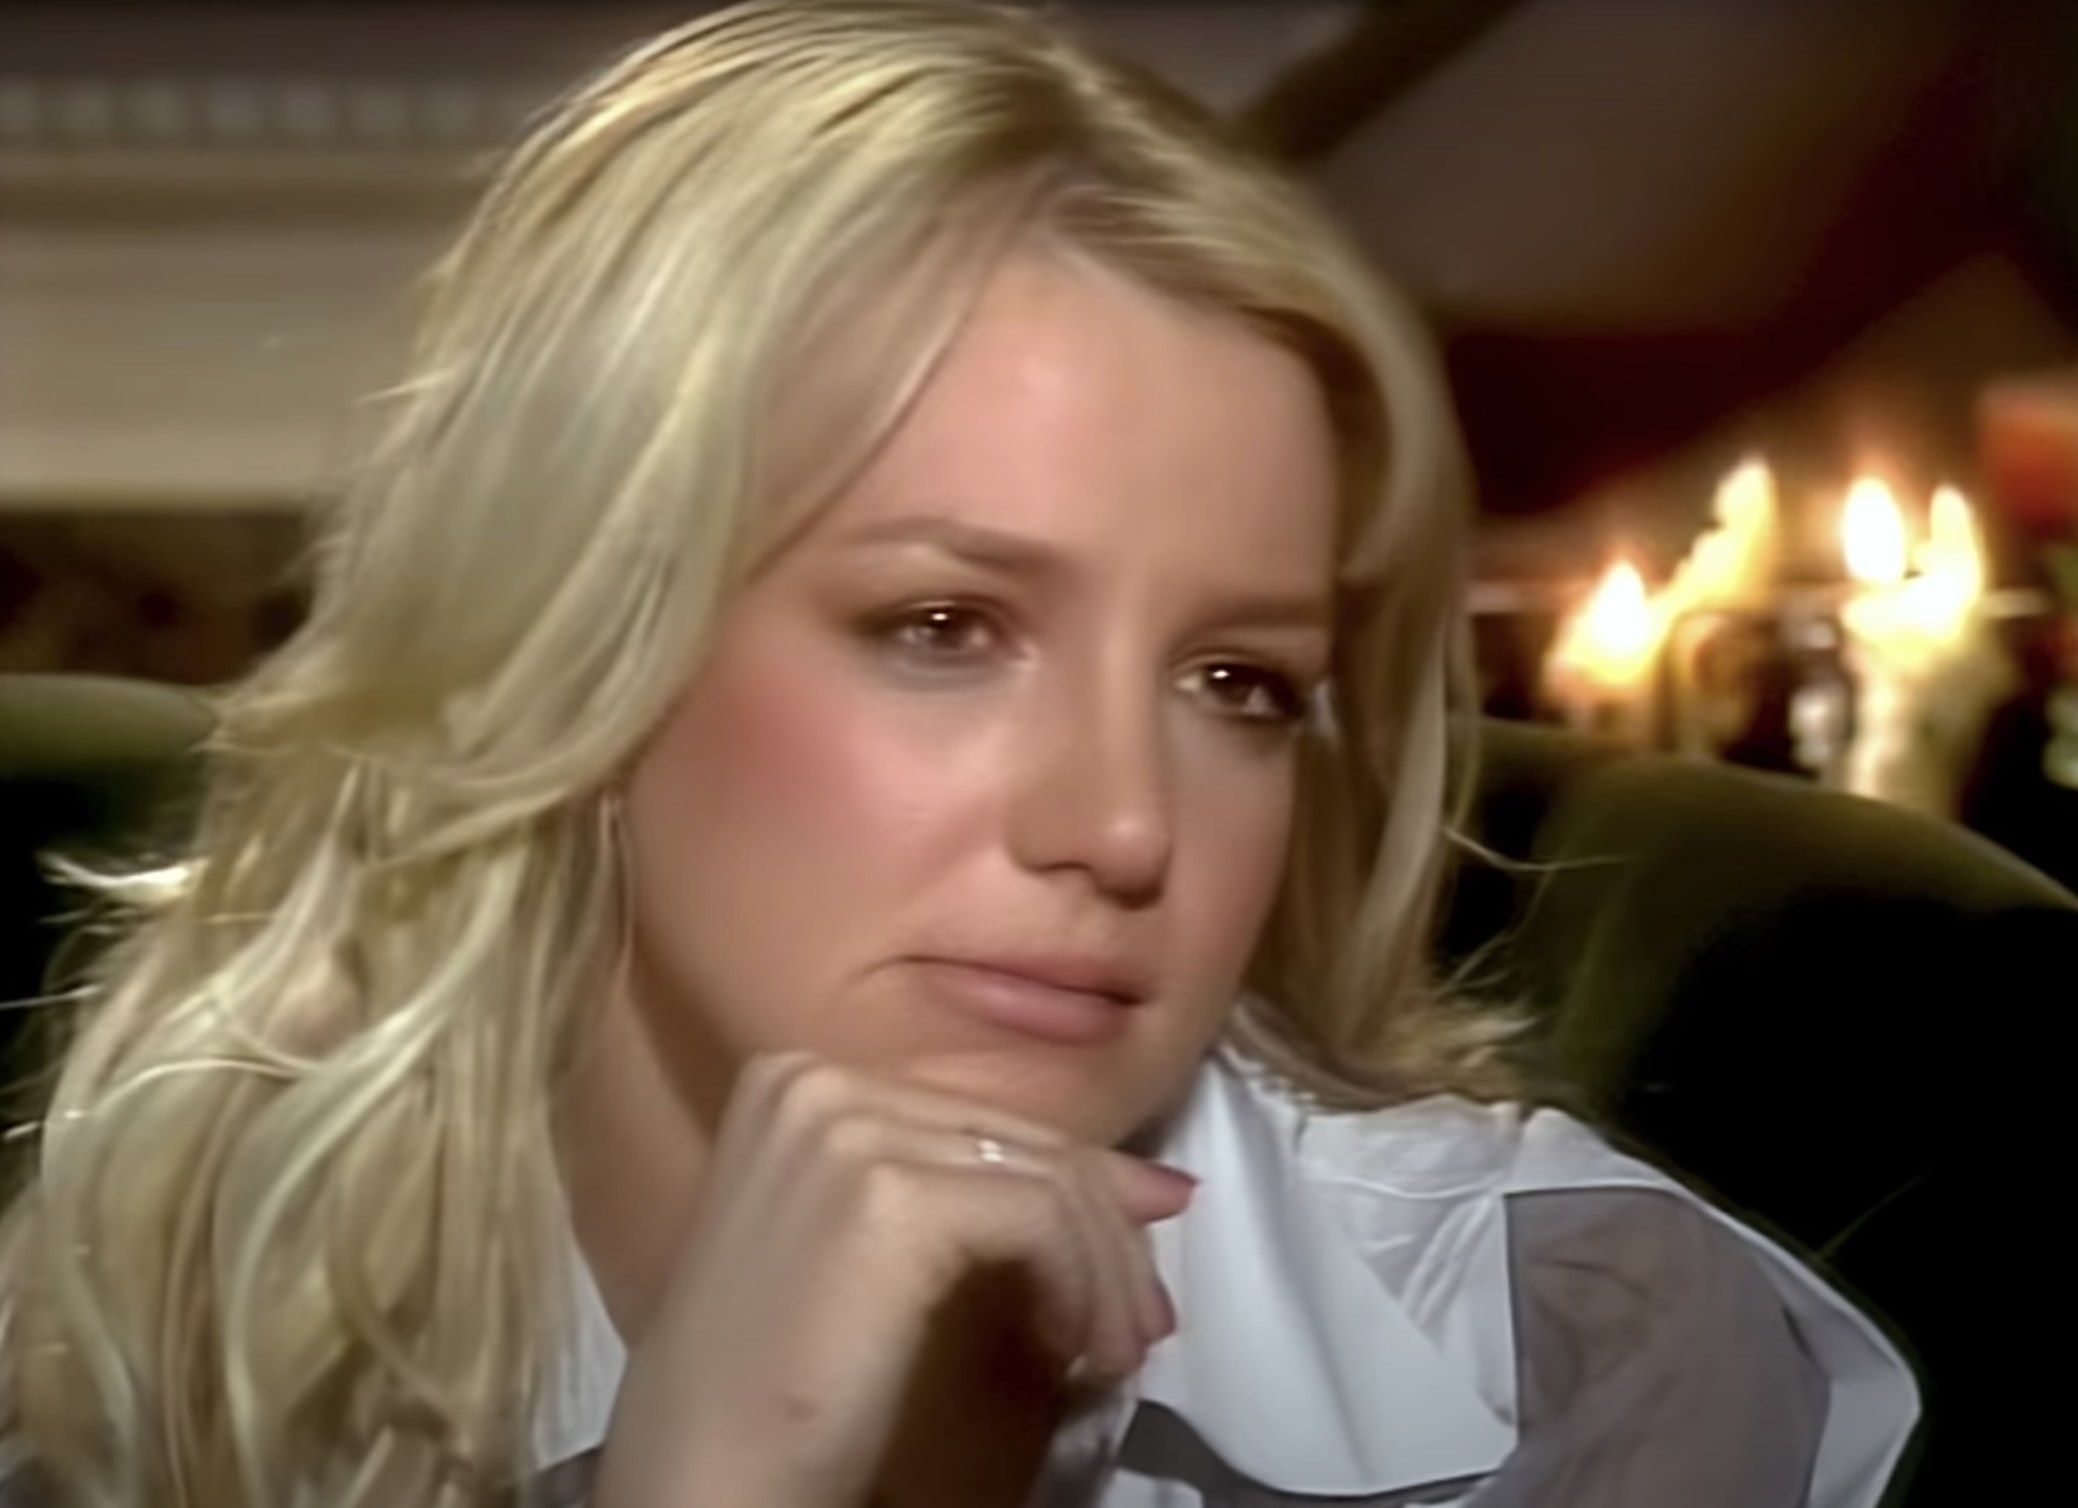 Britney looks tearful during the interview